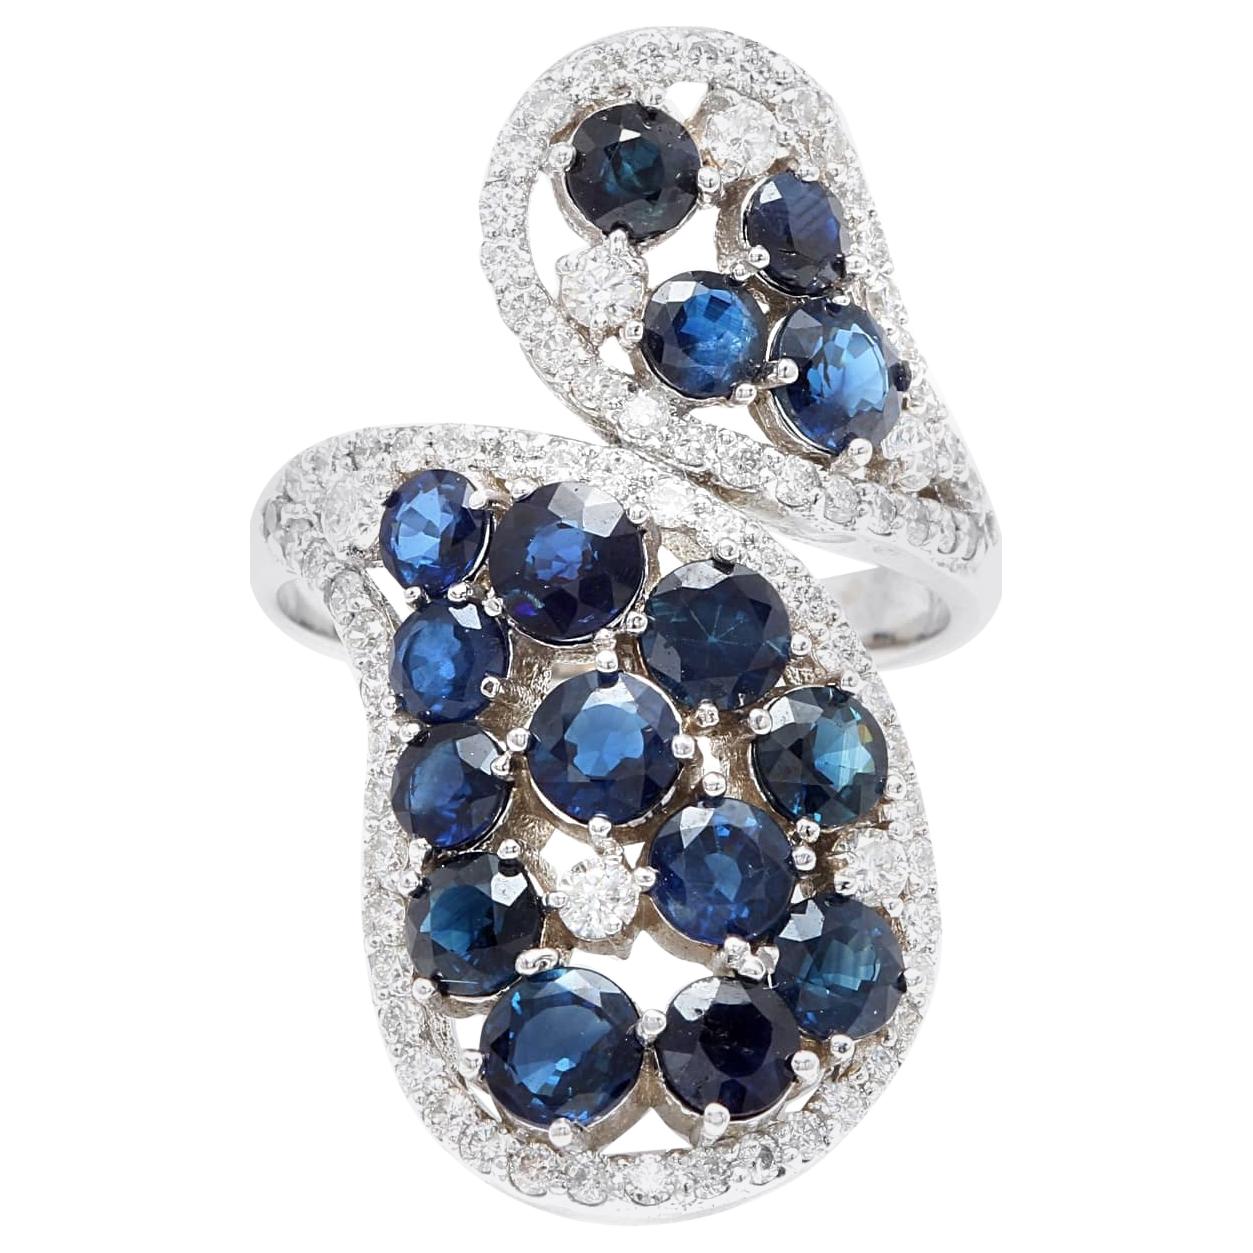 5.50 Carat Exquisite Natural Blue Sapphire and Diamond 14 Karat Solid White Gold For Sale